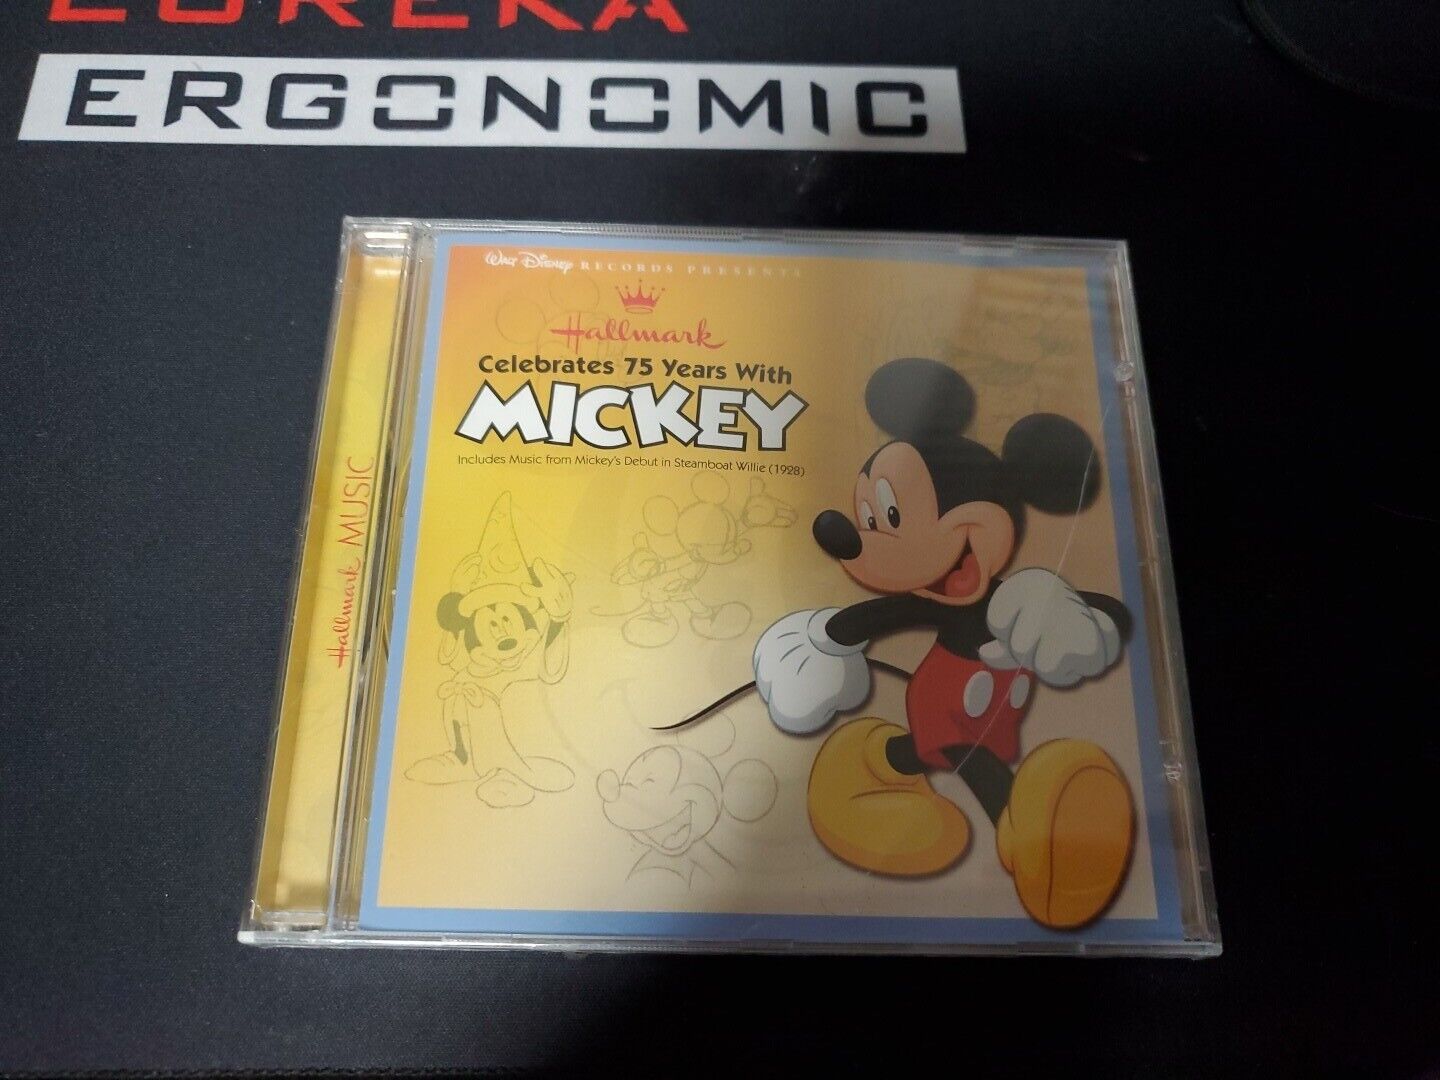 Hallmark Celebrates 75 Years With Mickey Mouse (CD) *Brand New*